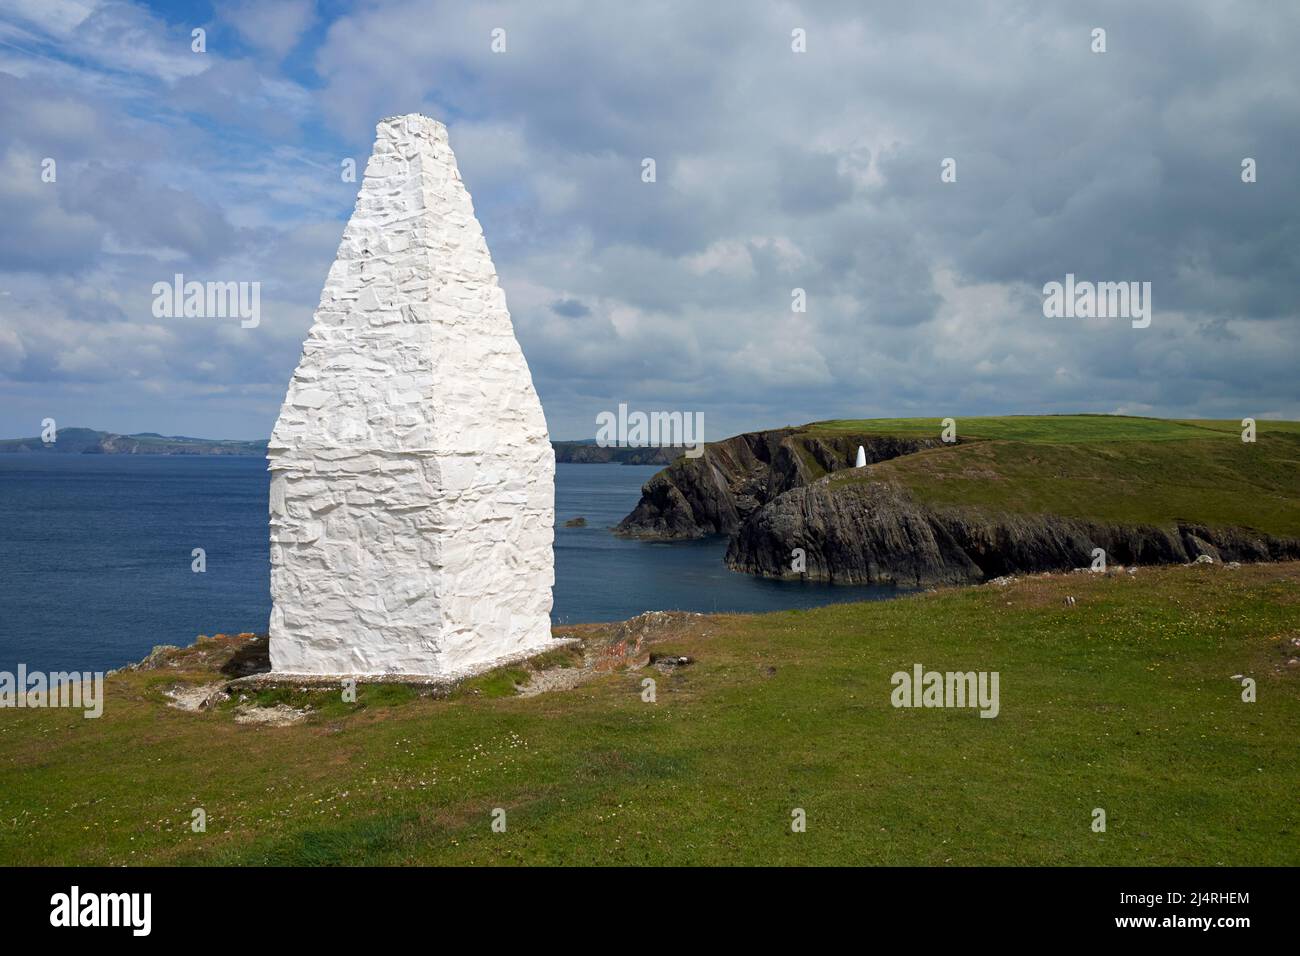 A whitewashed stone cairn marking the harbour at Porthgain, Pembrokeshire, Wales, UK. A second cairn can be seen on the opposite clifftop. Stock Photo